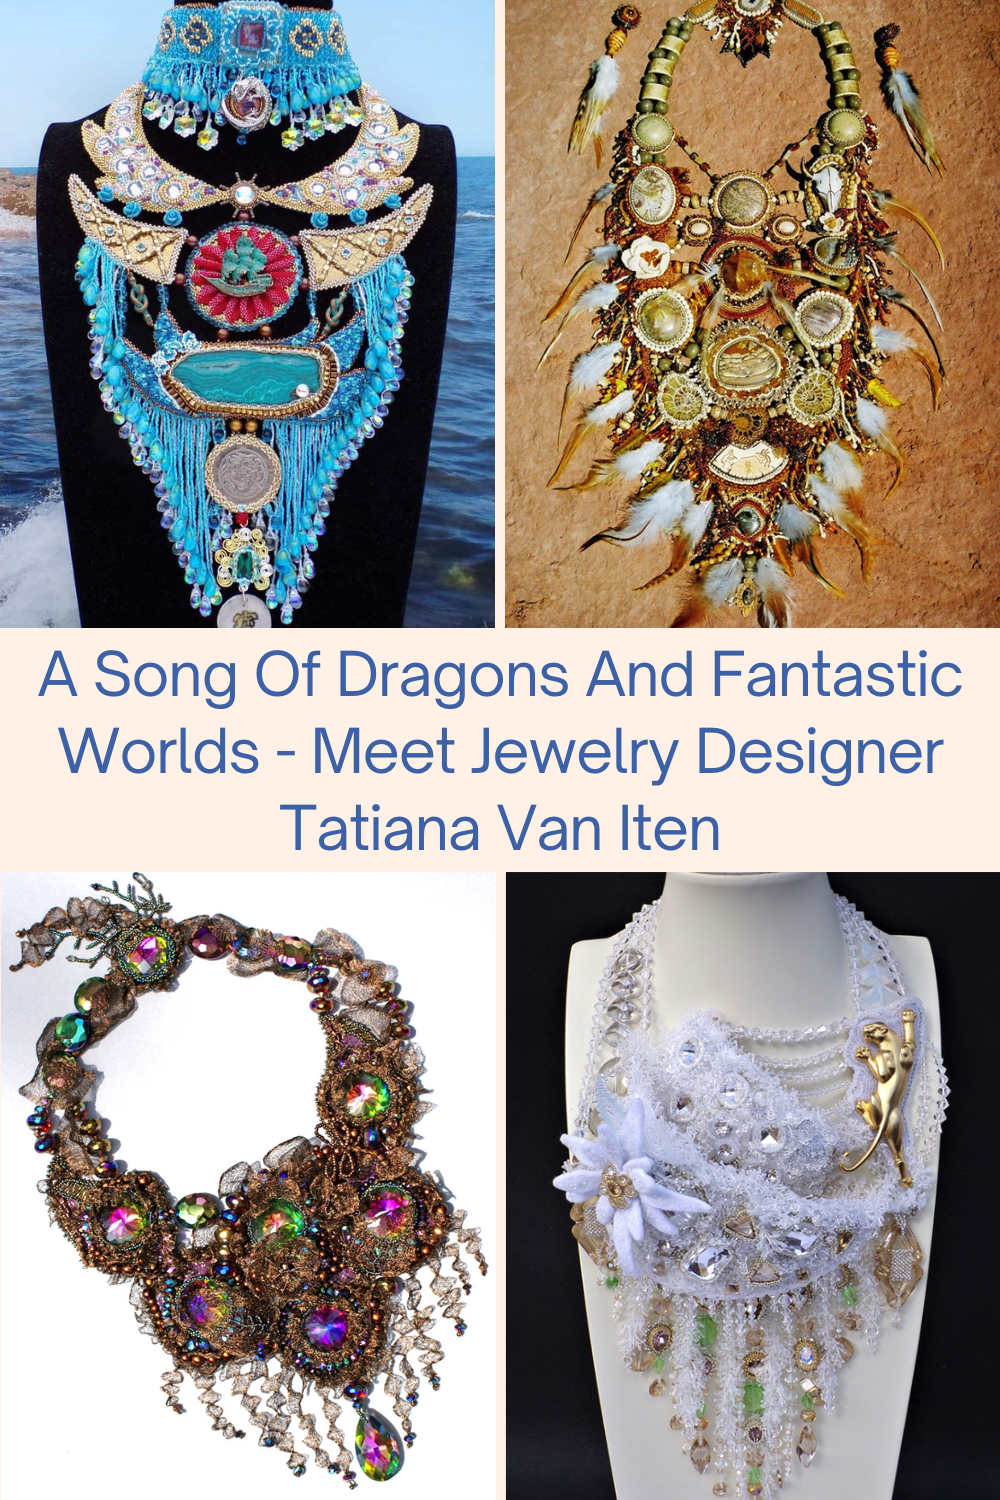 A Song Of Dragons And Fantastic Worlds - Meet Jewelry Designer Tatiana Van Iten Collage